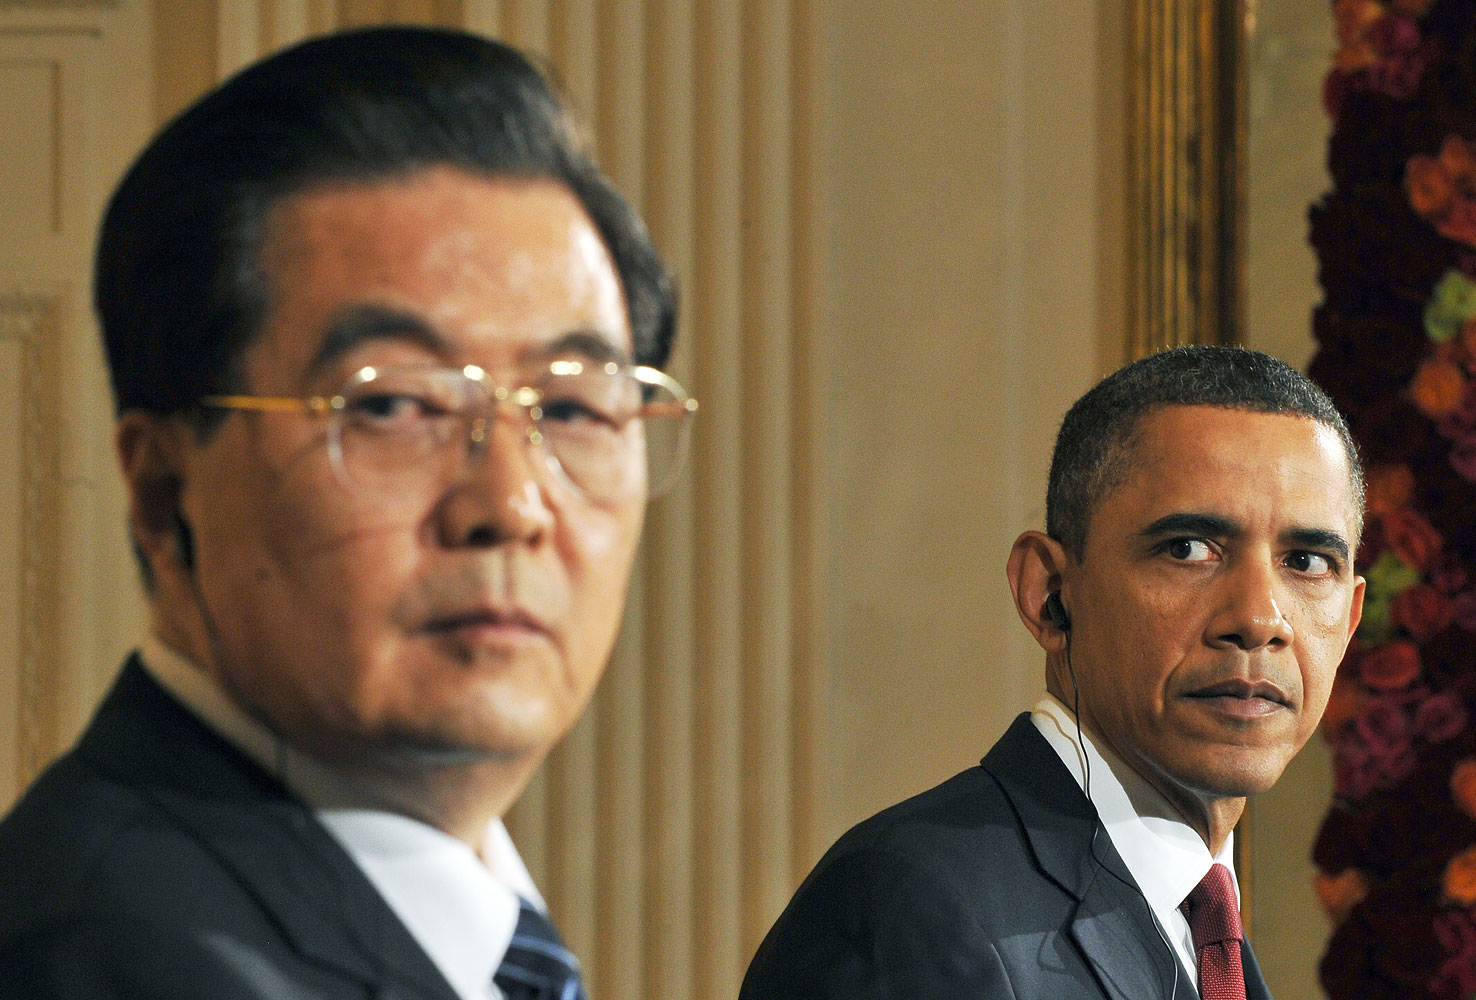 US President Barack Obama and his Chinese counterpart Hu Jintao hold a press conference in the East Room at the White House in Washington, DC, on Jan. 19, 2011. (Jewel Samad—AFP/Getty Images)